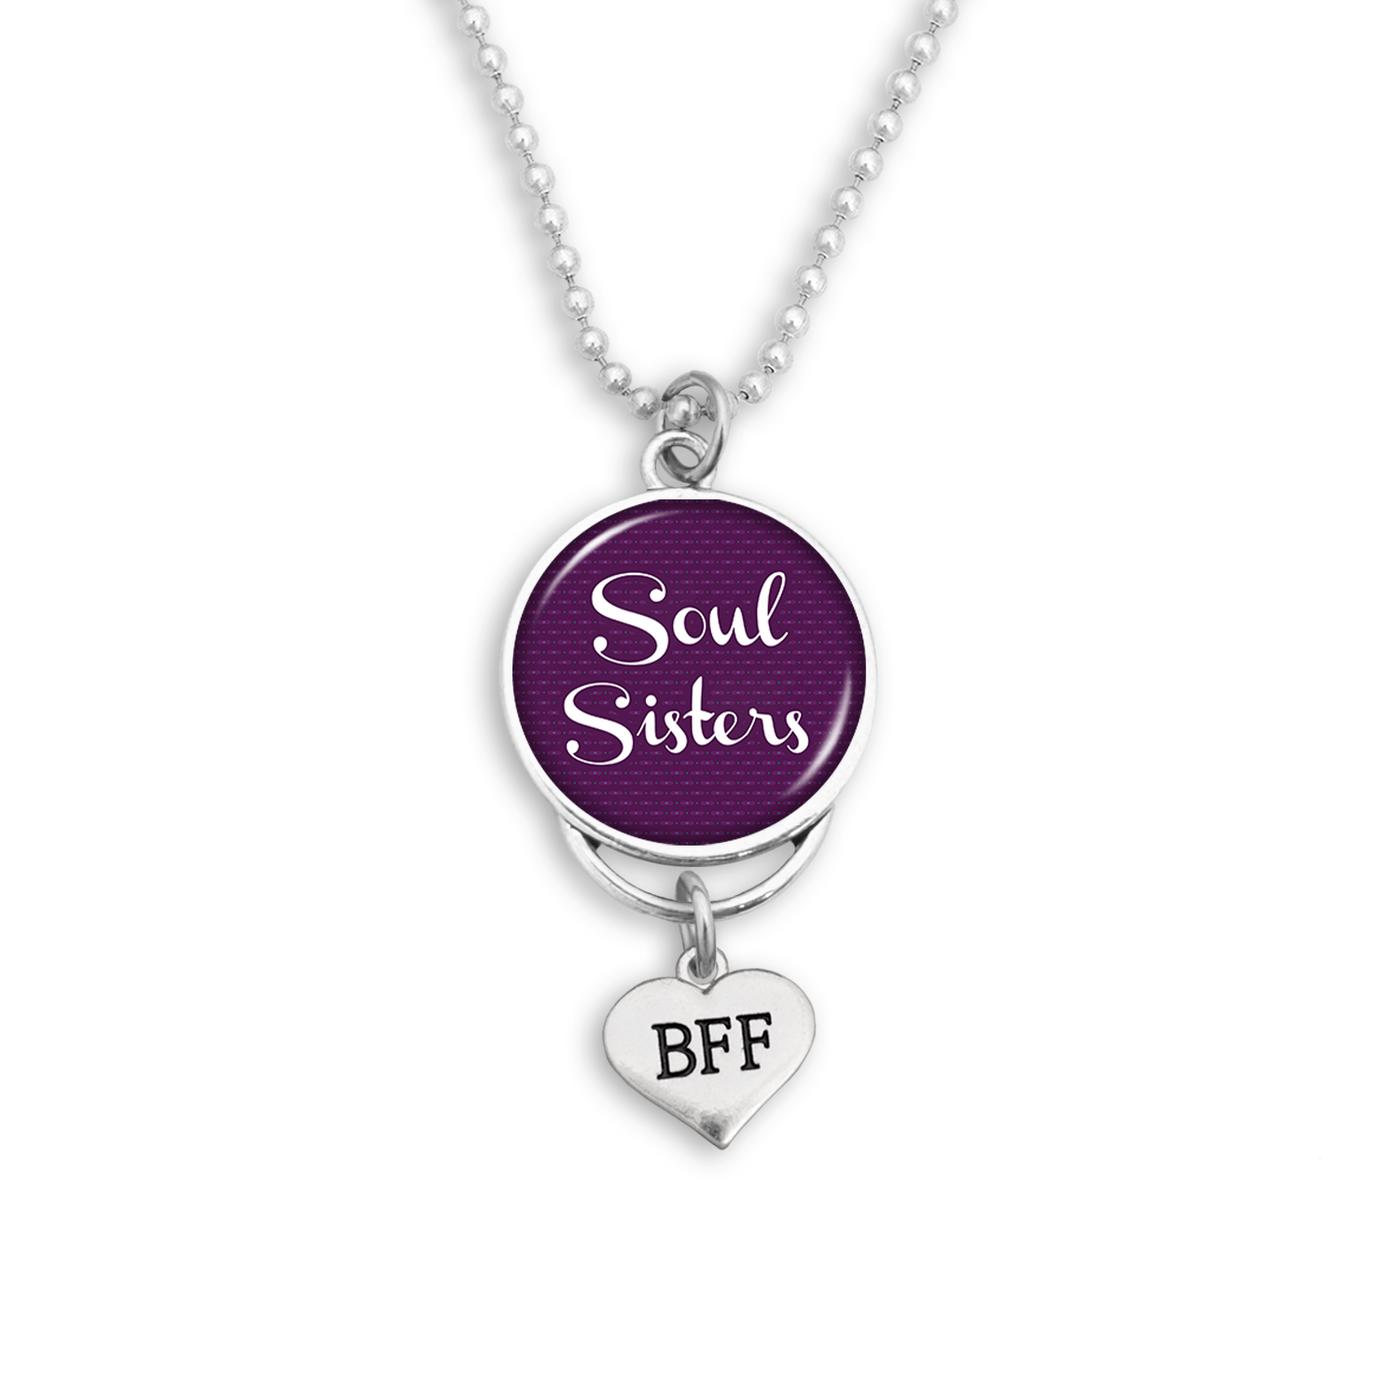 Soul Sisters Rearview Mirror Charm